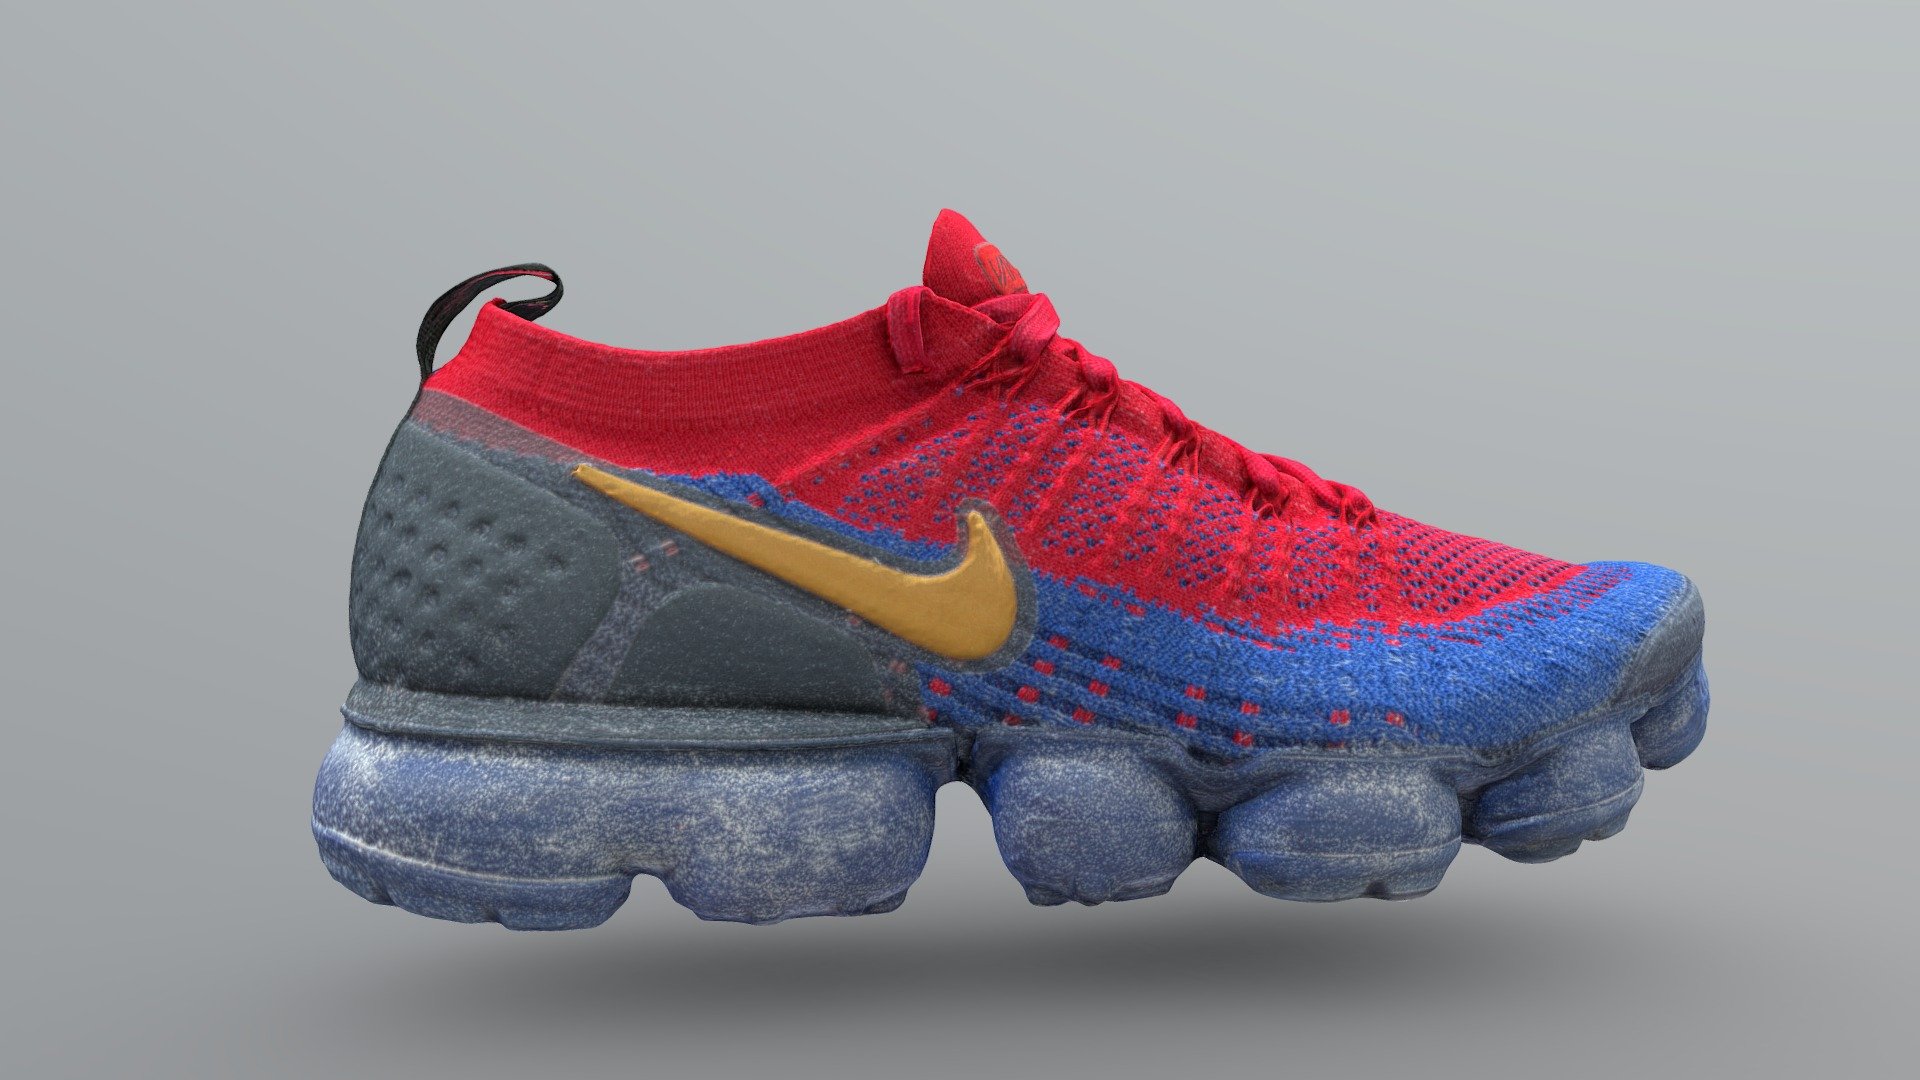 Please Like Before Downloading. Thank You!
VaporMax Maroon Blue and Gold
Textures are reconstruction Textures for Photogrammetry 3d model